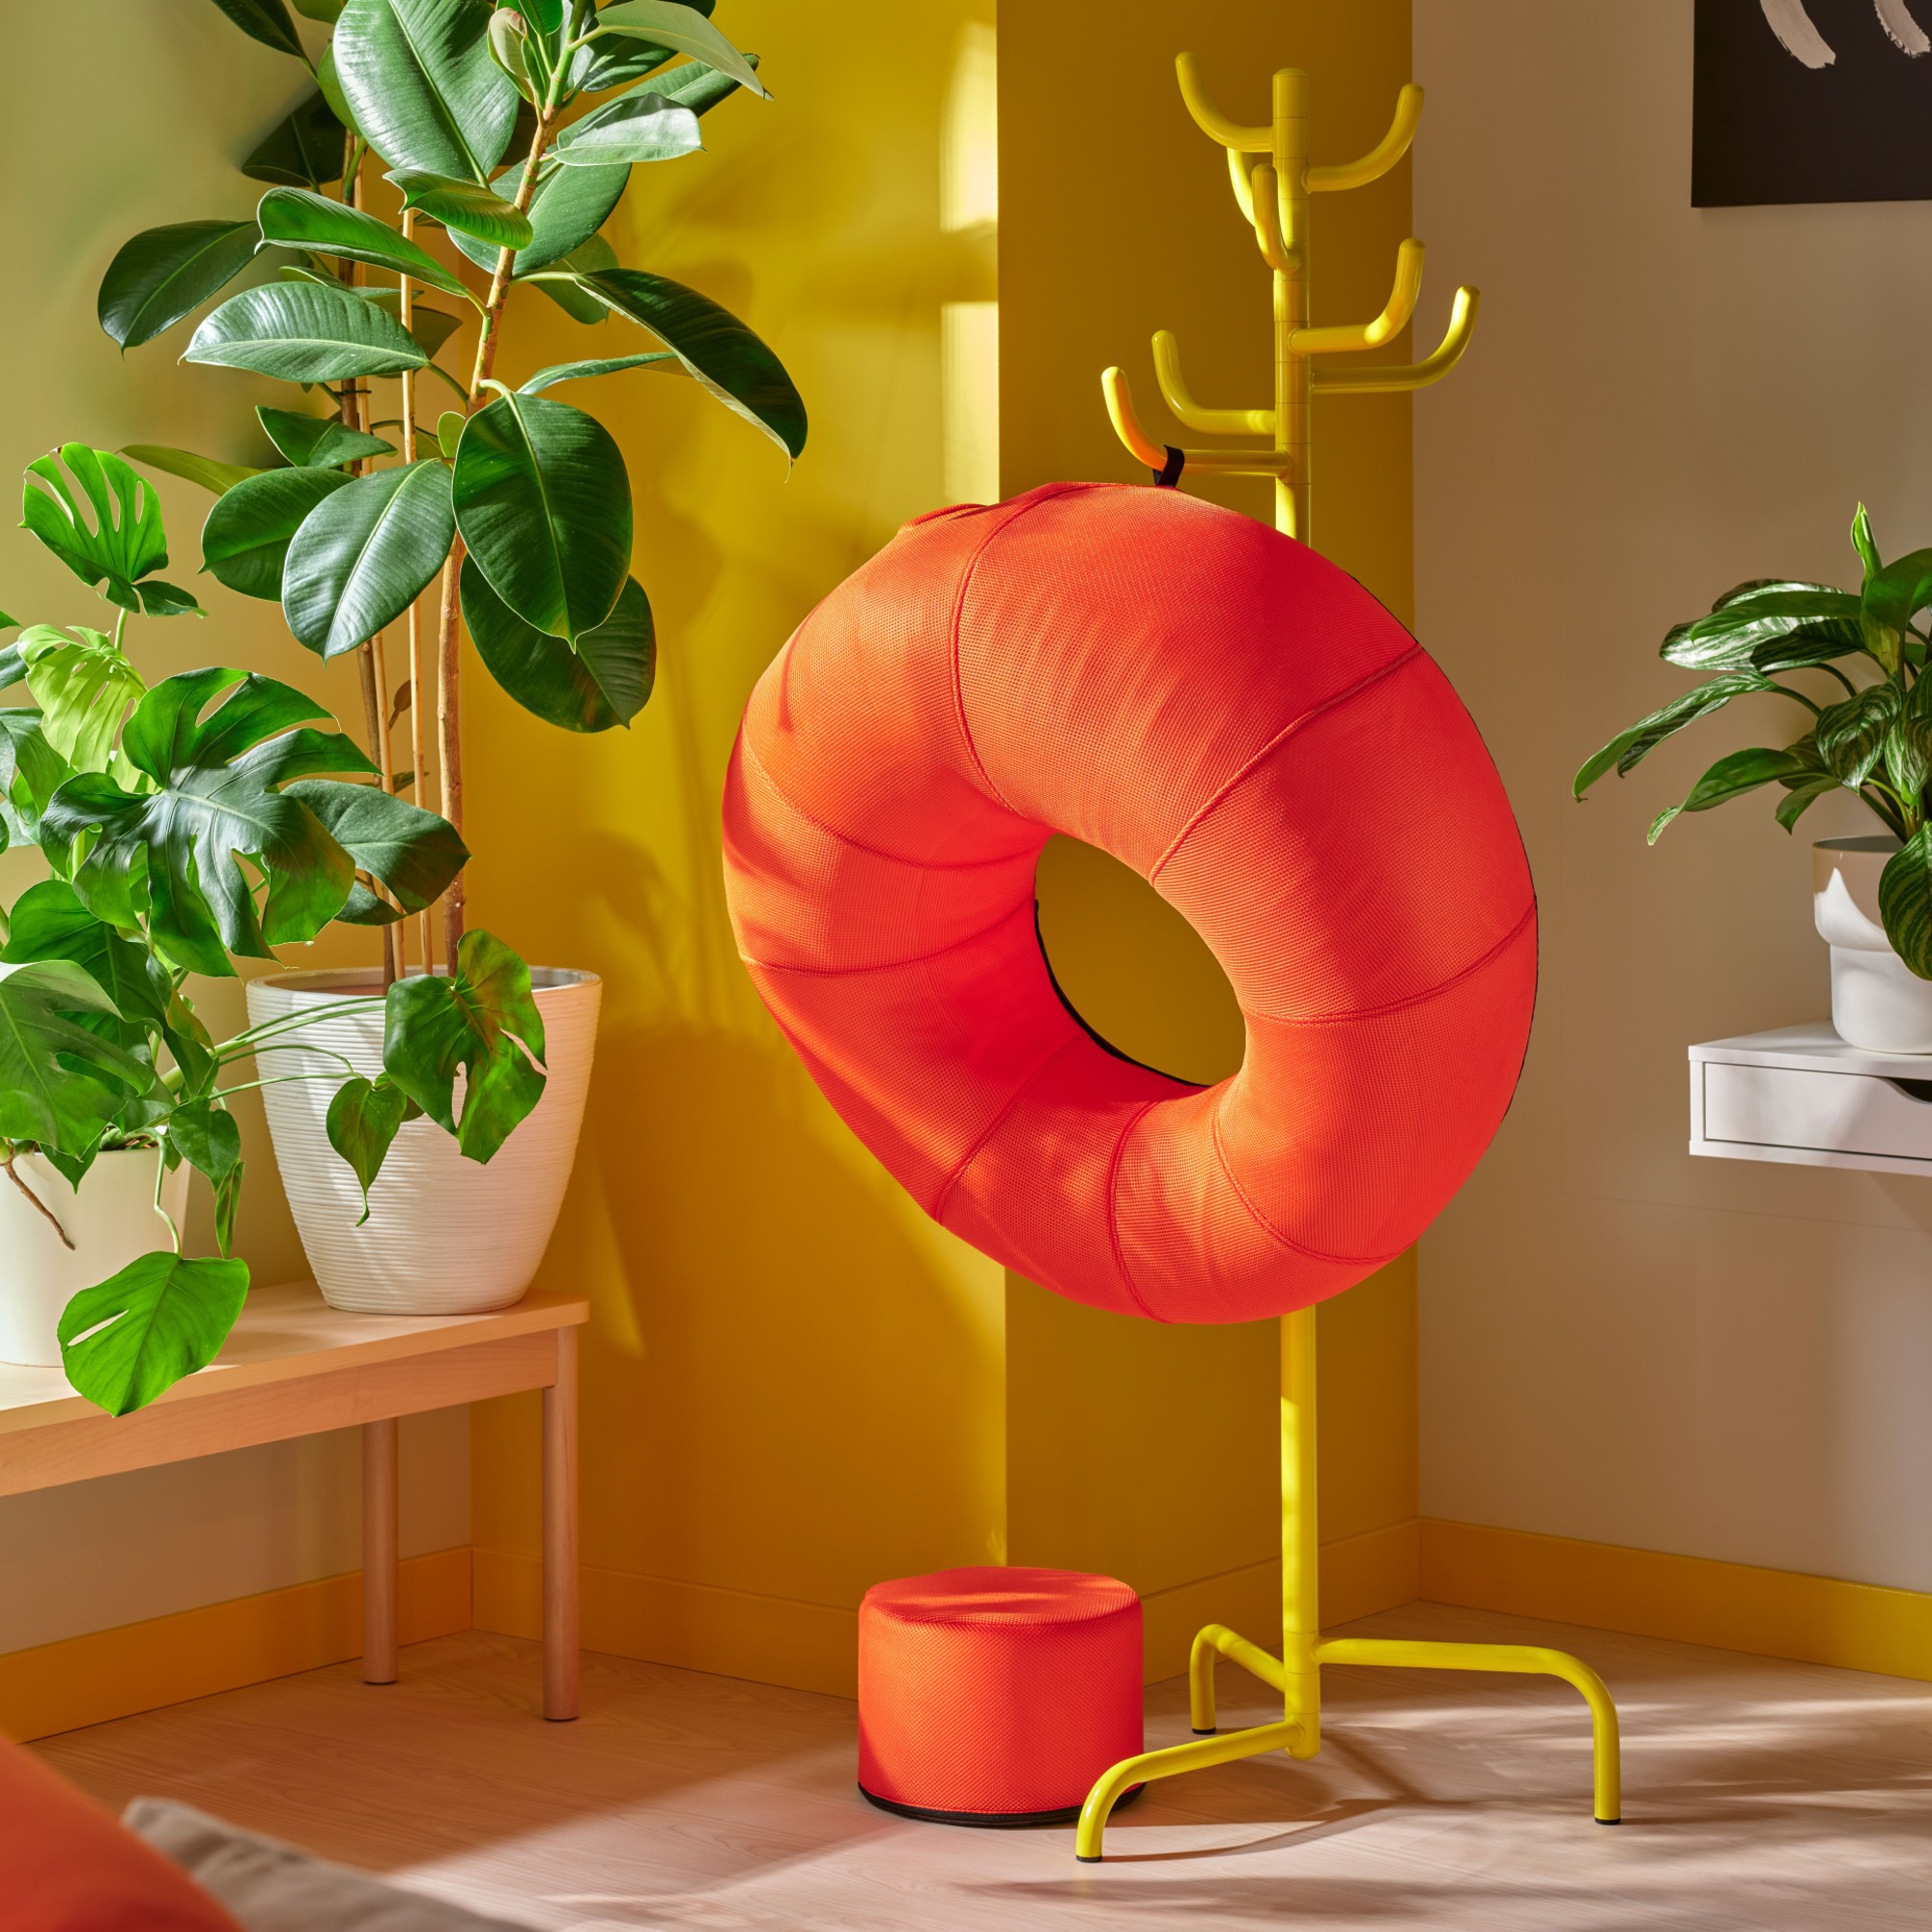 IKEA BRÄNNBOLL collection inflatable chair hanging on a rail in a yellow room